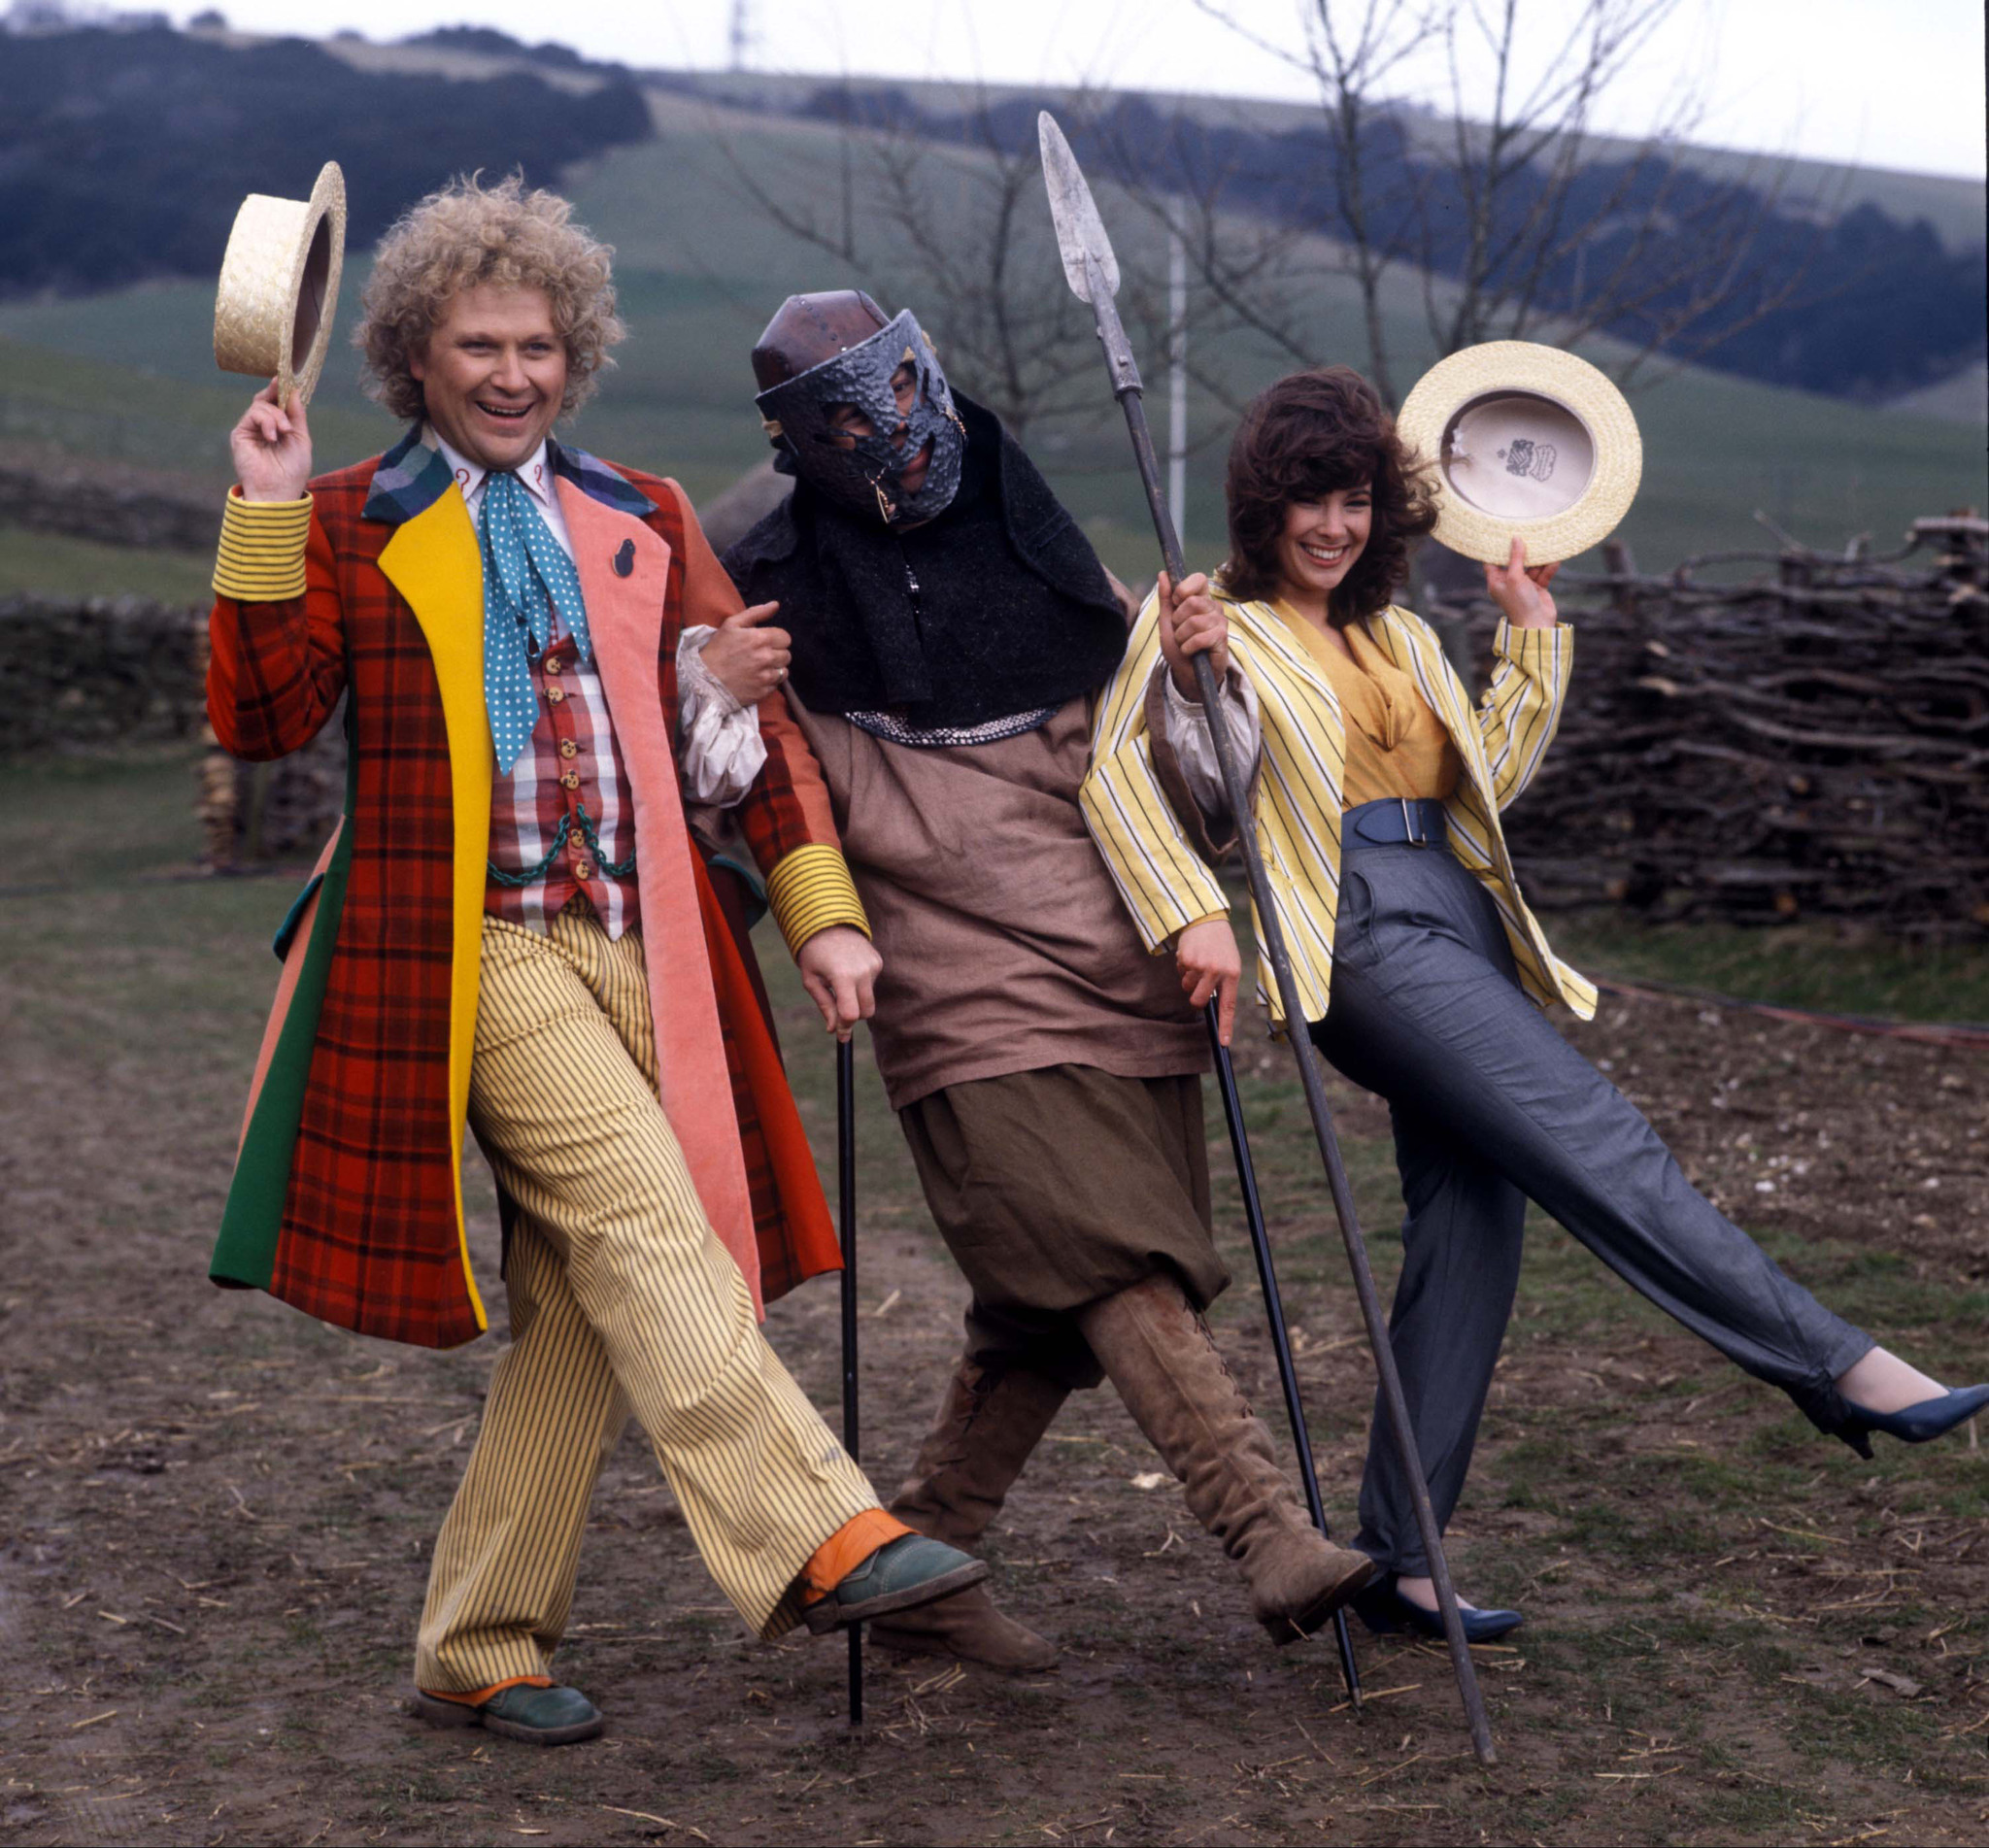 British Actor Colin Baker Who Plays The Doctor In The Bbc Television Series Dr Who. Pictured Here With His Assistant Peri Played By Nicola Bryant And Extras From The Show, 10.04.1986.